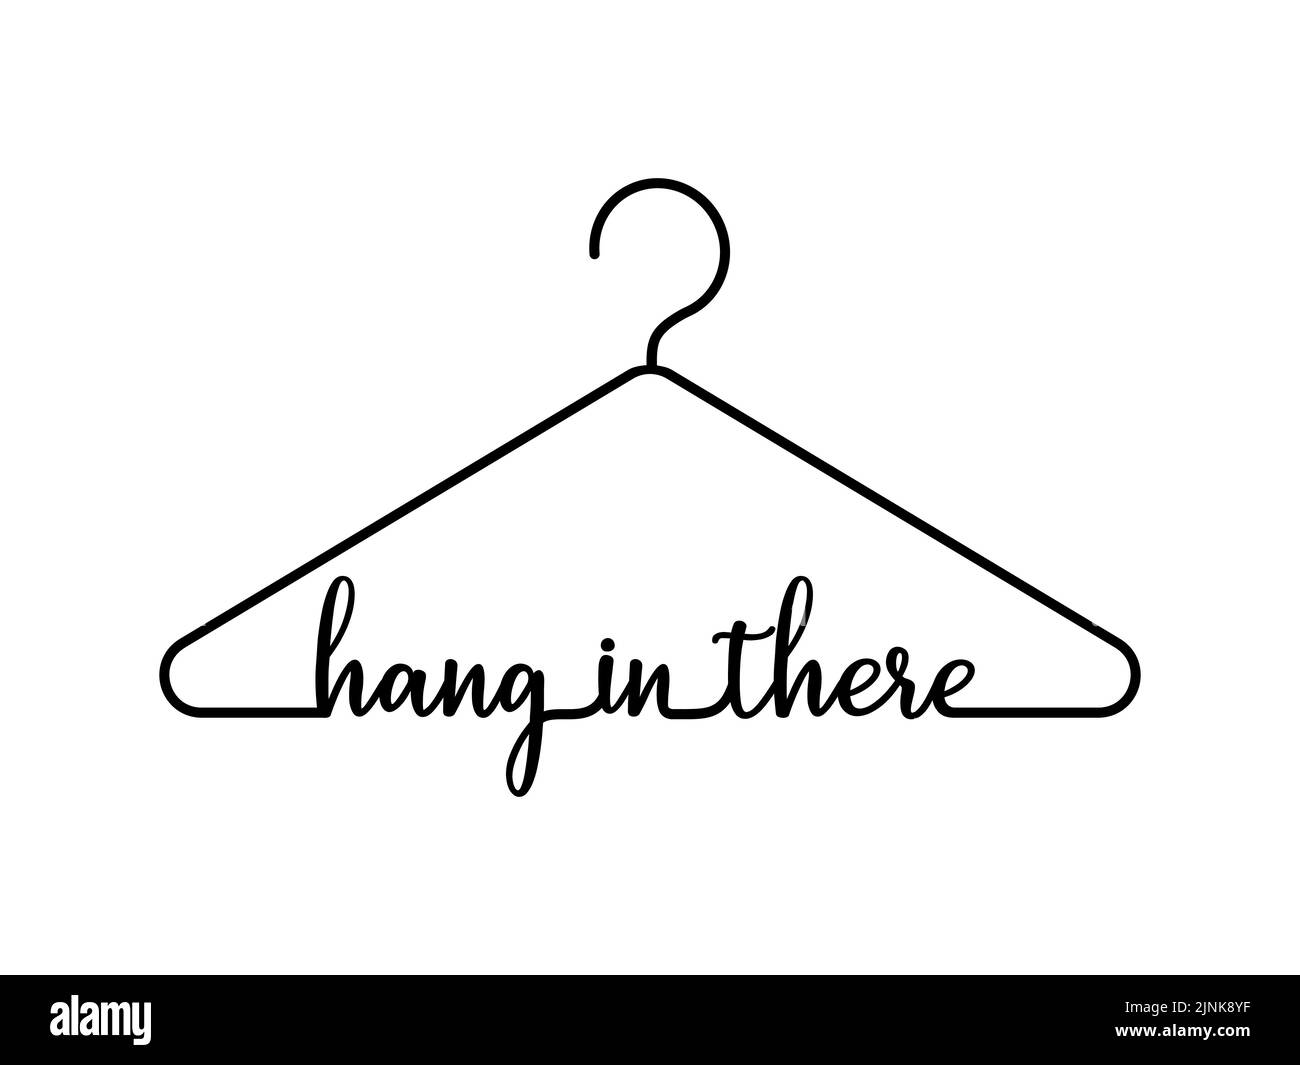 Hang in there. Motivational message with hanger graphic. Text: 'Hang In There'. Encouragement, support concept. Greeting card. Fashion lover. Vector Stock Vector